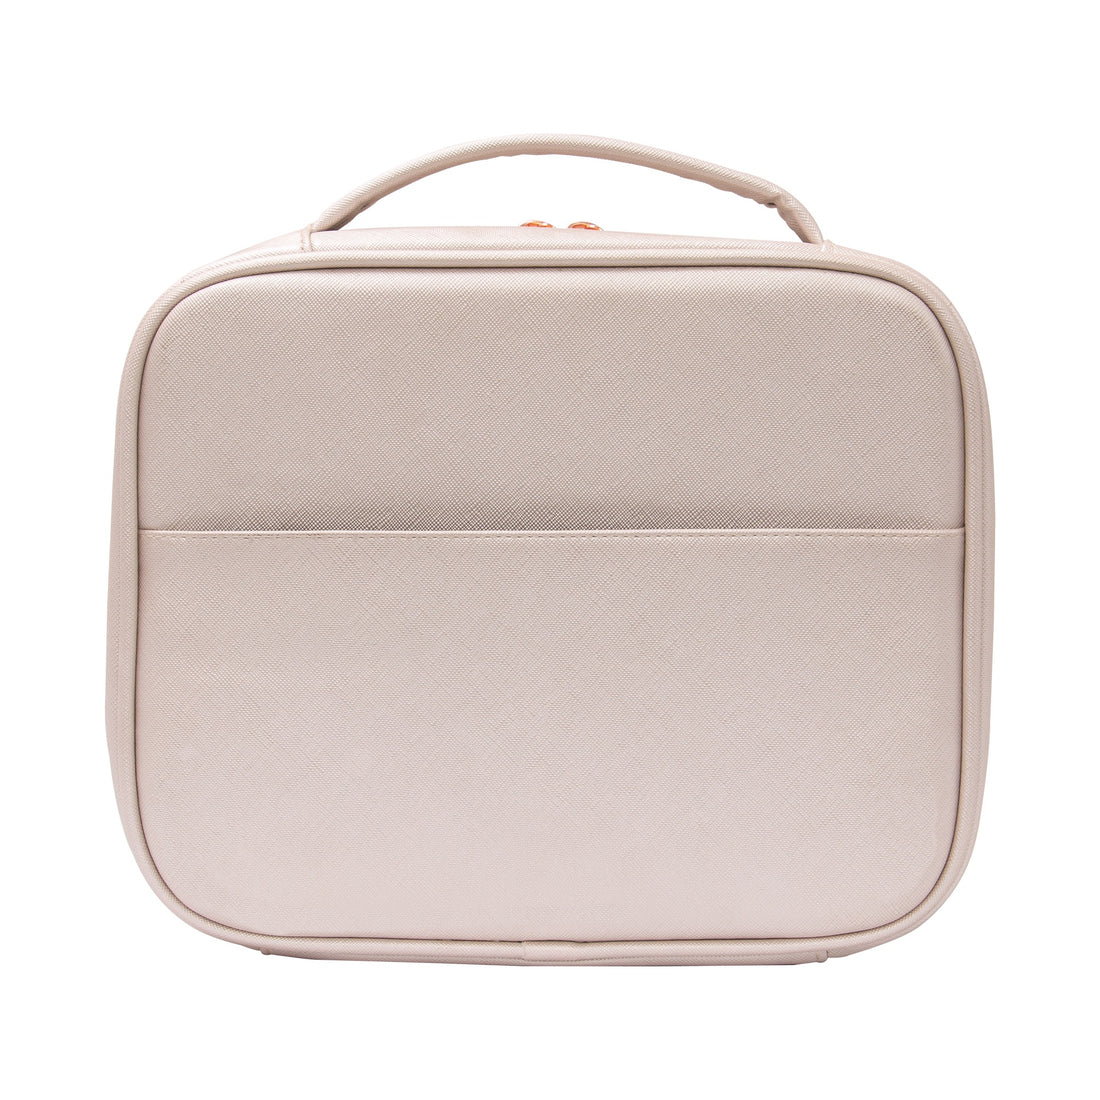 Verona Makeup Carry Case with Adjustable Dividers